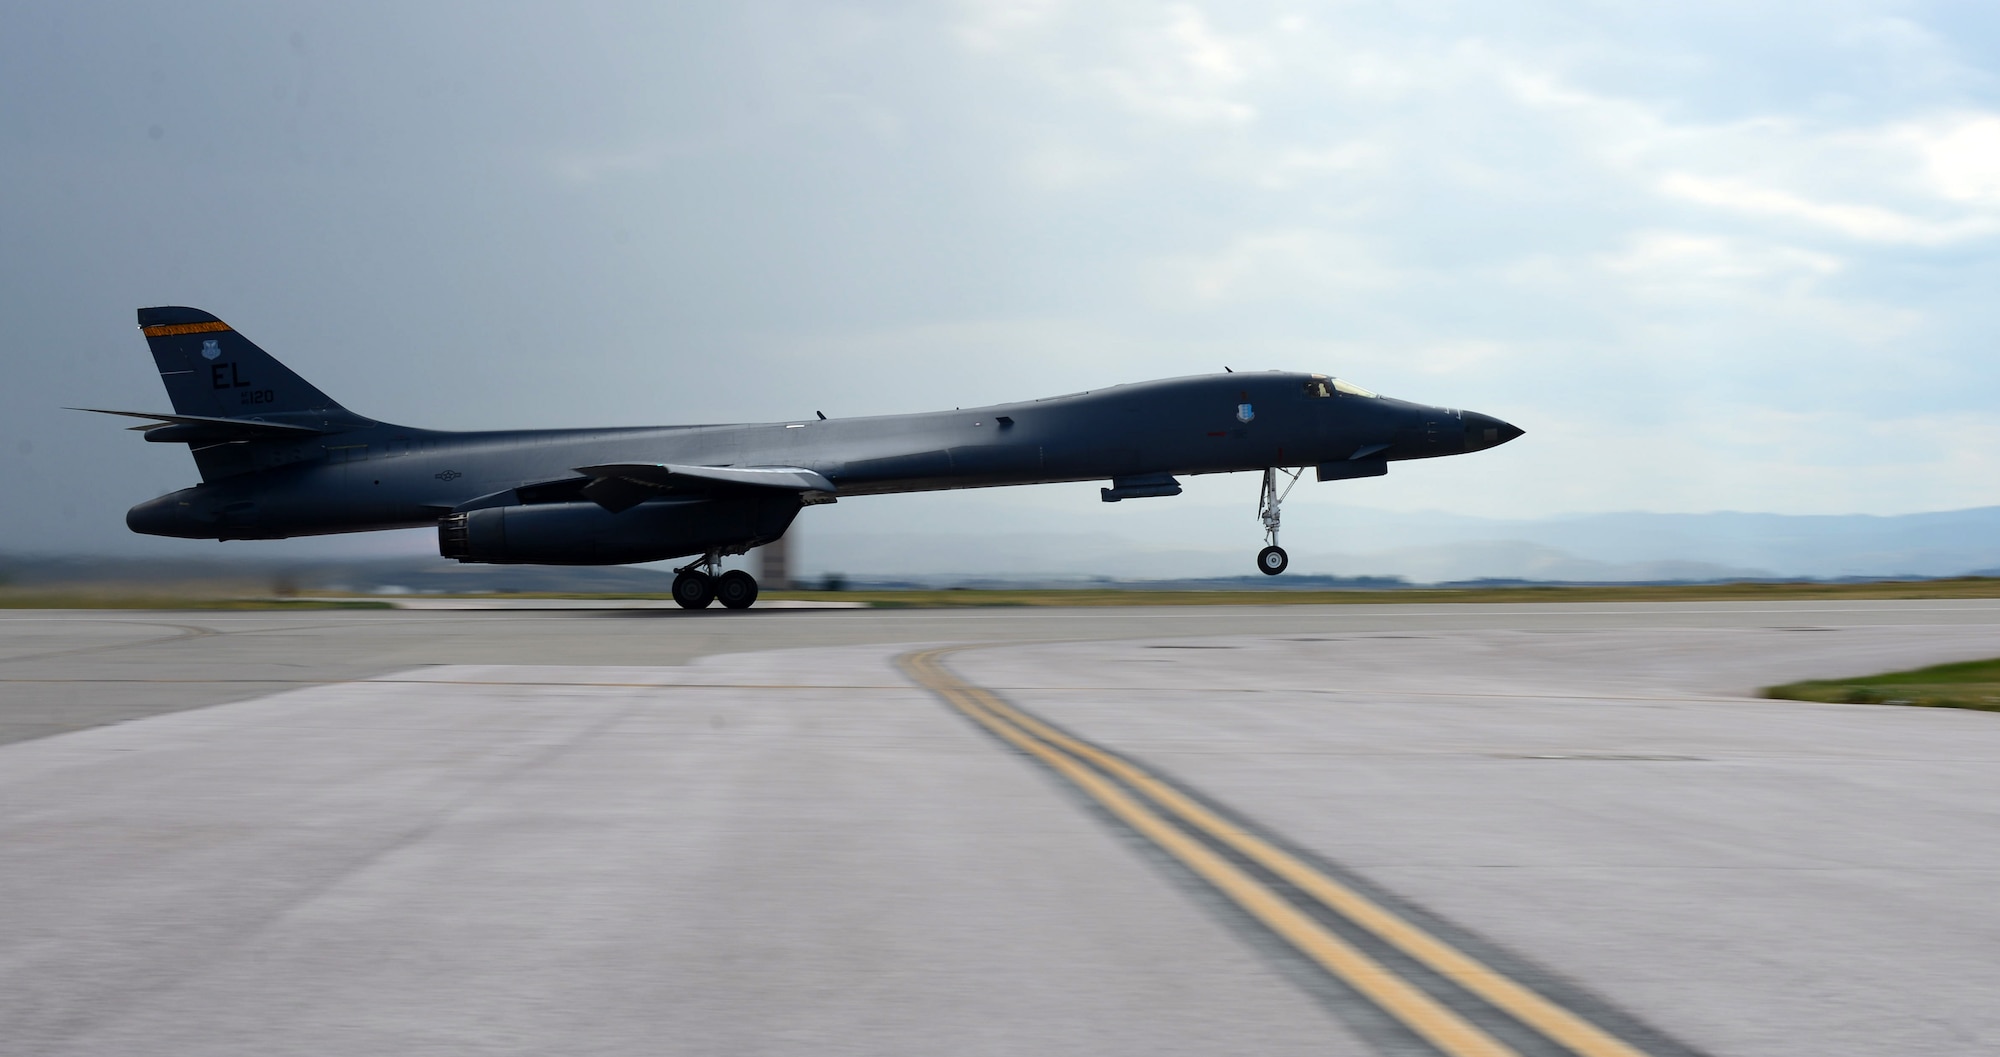 A B-1 bomber with Maj. Gen. Ferdinand Stoss III, the Director of Operations and Communications for Air Force Global Strike Command, aboard thunders of the flightline at Ellsworth Air Force Base, S.D., July 12, 2017. During the flight, Stoss was shown a number of B-1 mission capabilities to include long-range strike, close-air support, dynamic targeting, and low level strike capabilities. (U.S. Air Force photo by Airman 1st Class Donald C. Knechtel)